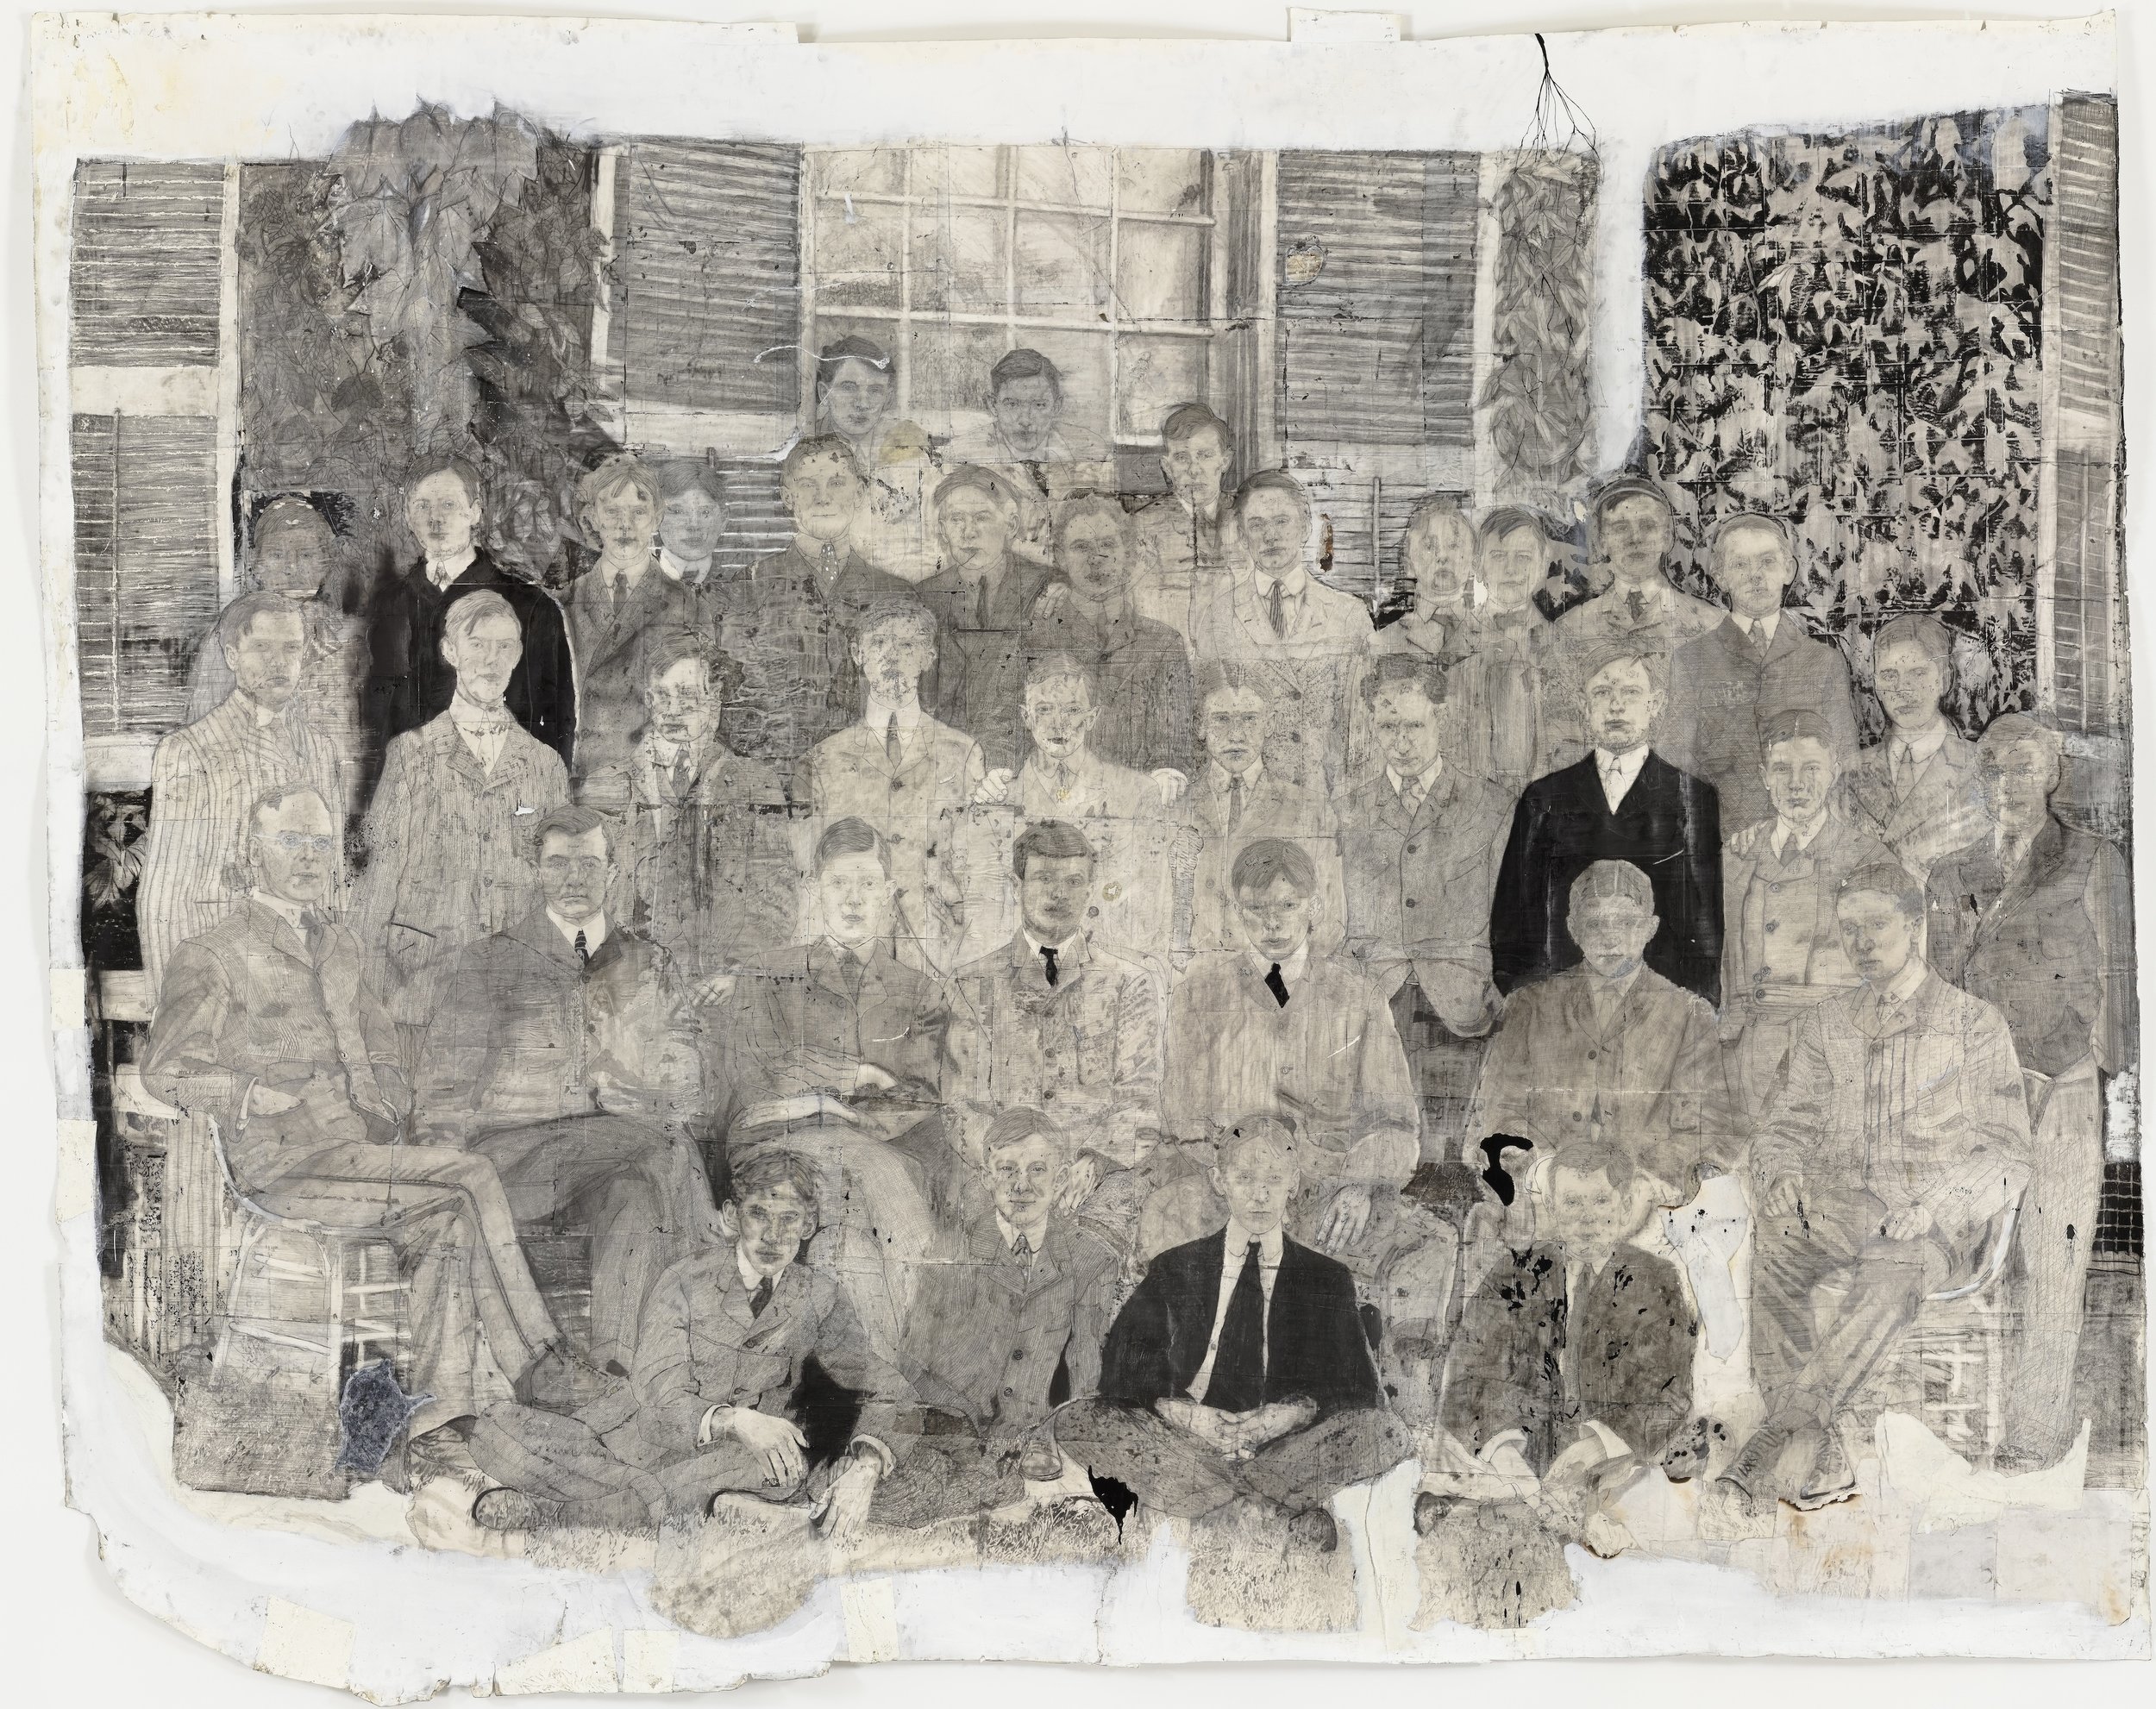  BROOKLYN INSTITUTE OF FASHION AND CURATORIAL STUDIES, mixed media on paper, 122X154 in. 310X391 cm. 2012 